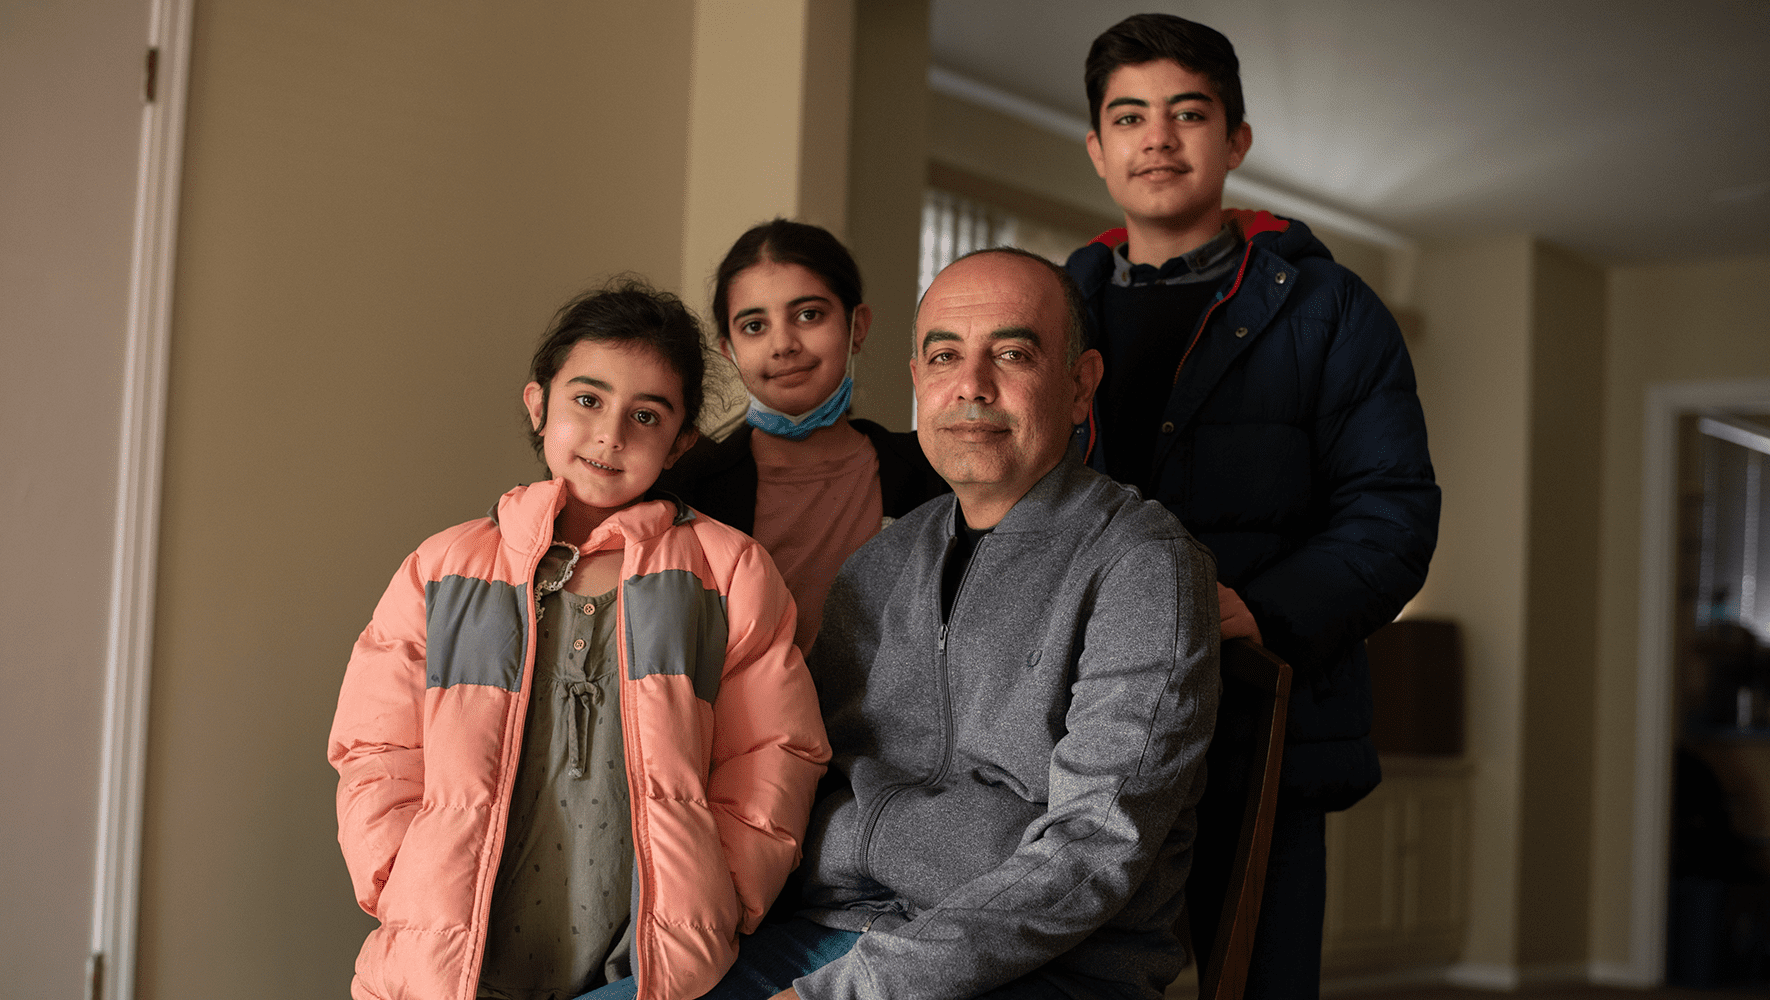 Afghan evacuee Zubair Babakarkhail sits with his three children in their new Pittsburgh apartment on Friday, Dec. 10, 2021. After being resettled by HIAS resettlement partner JFCS Pittsburgh, Babakarkhail now works for the organization as a cultural navigator. (Stephanie Strasburg/HIAS)